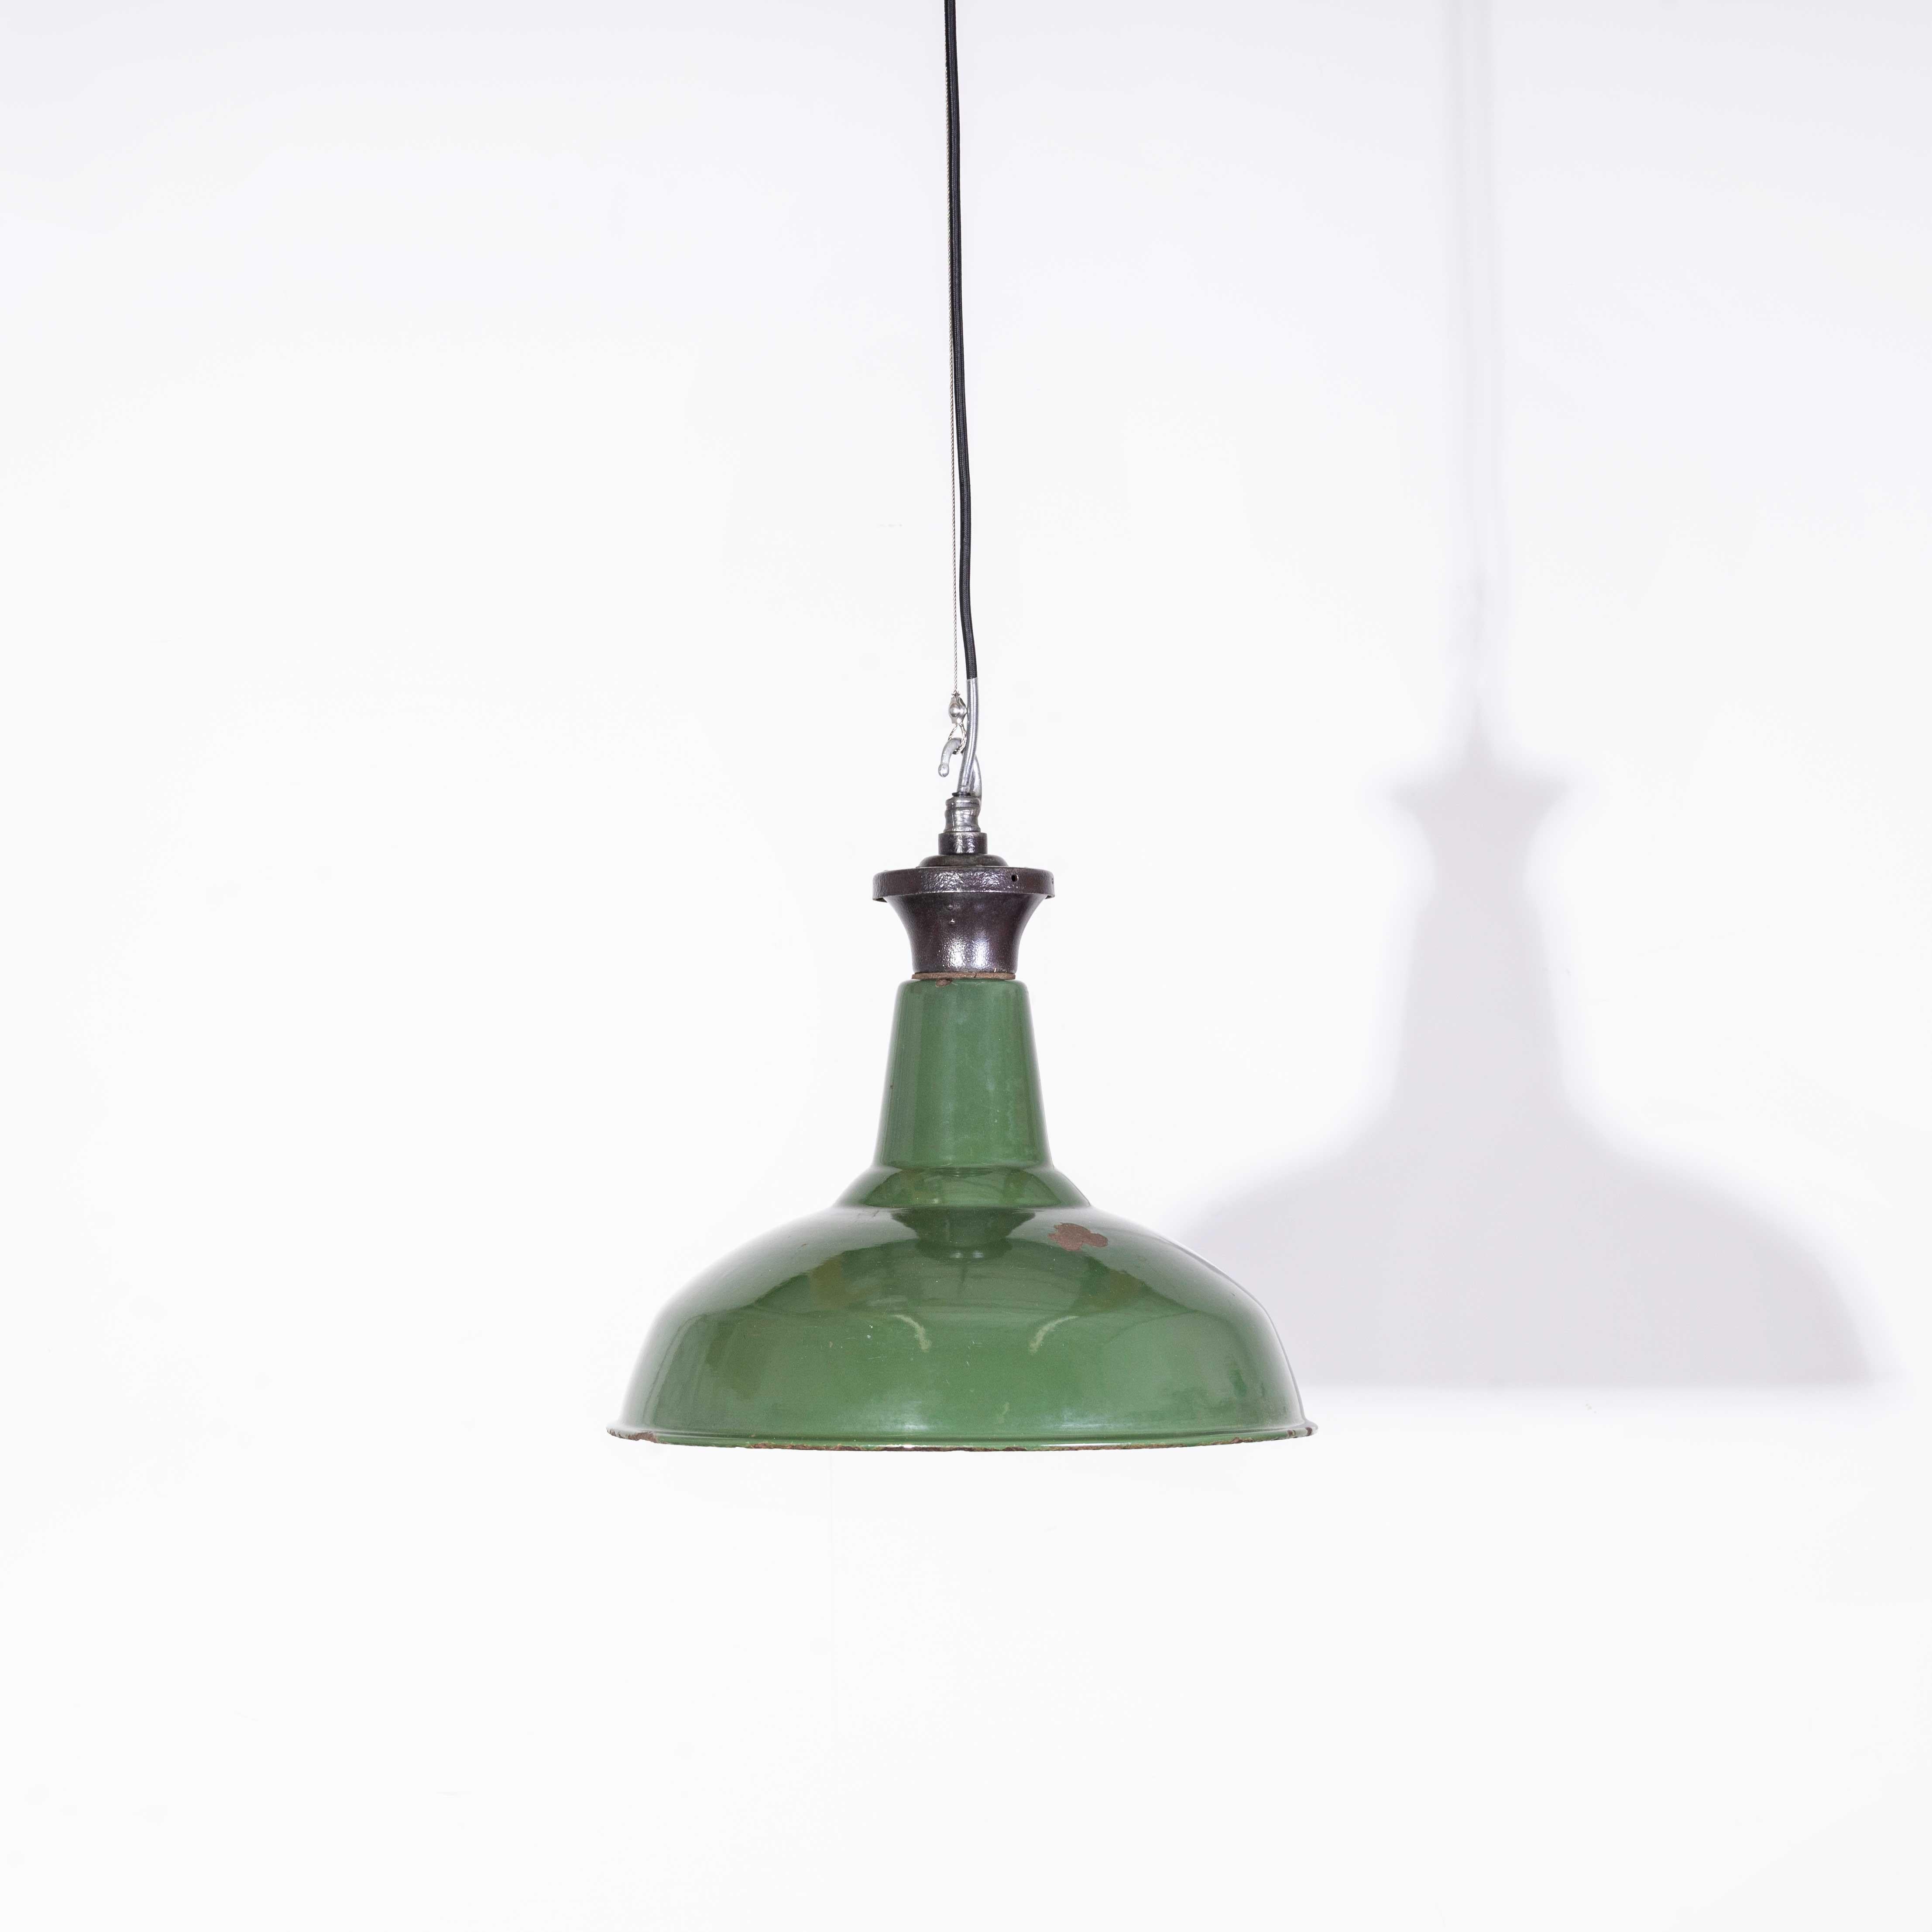 Mid-20th Century 1940's Real Industrial Enamel Green Single Pendant Lamp - 16 Inch For Sale